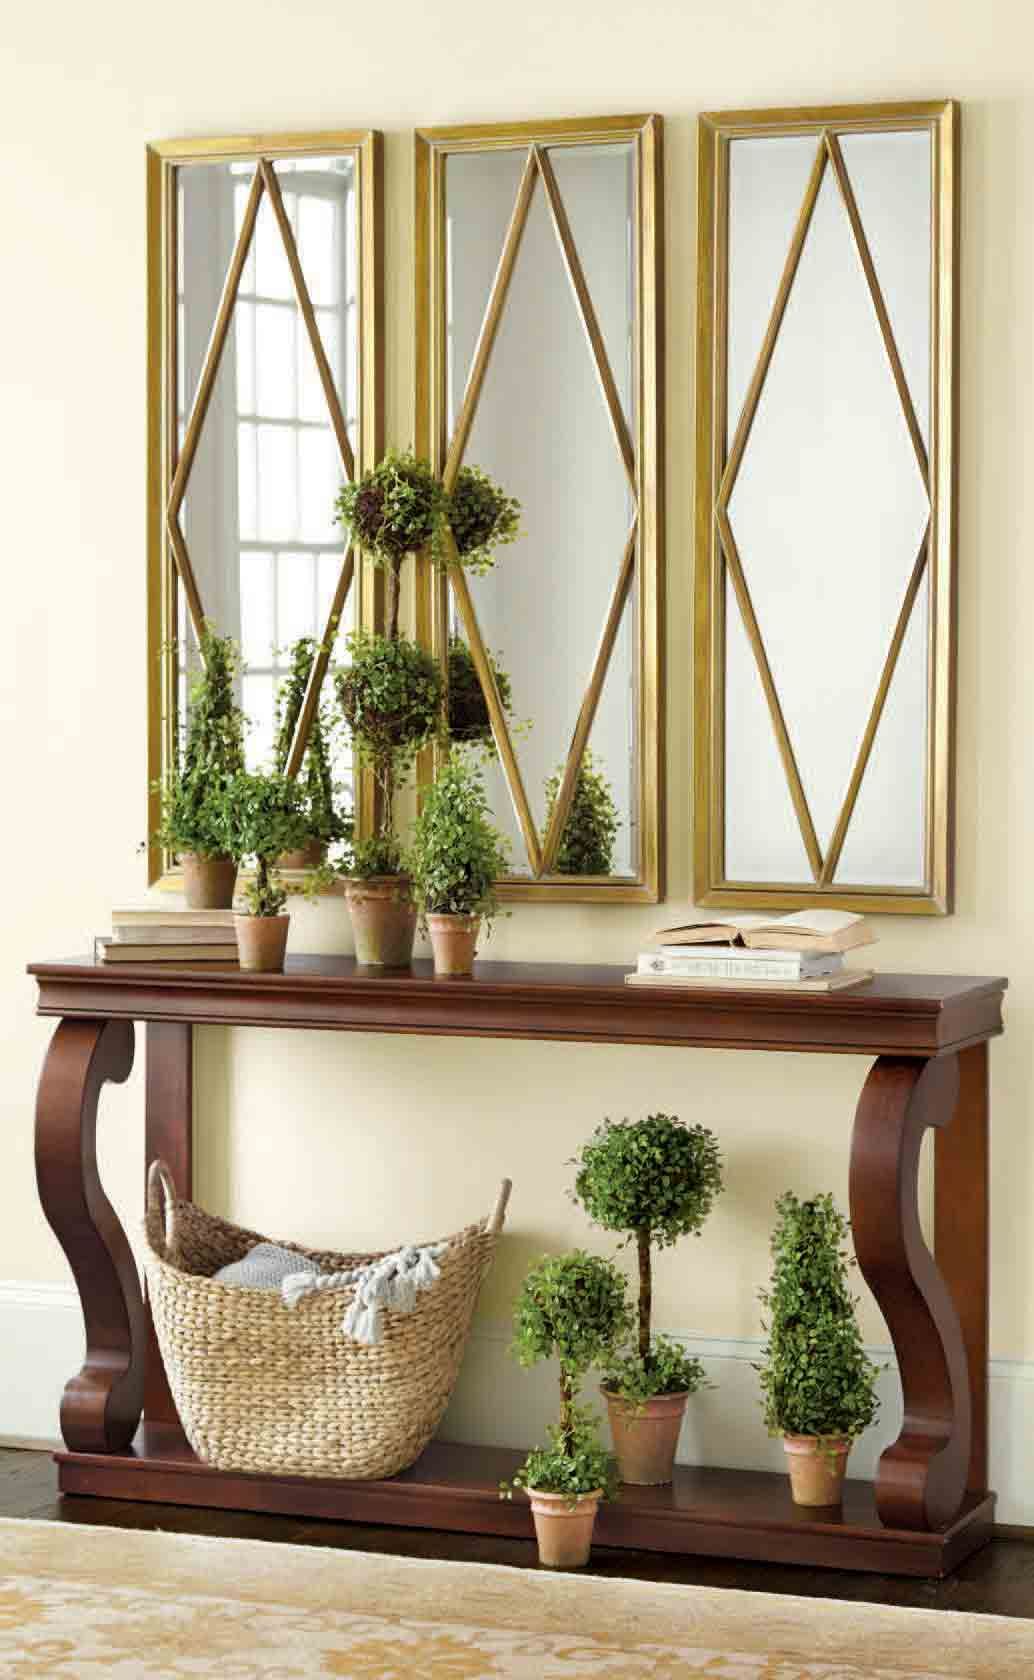 Entry Wall Decor: A Touch Of Class And Color